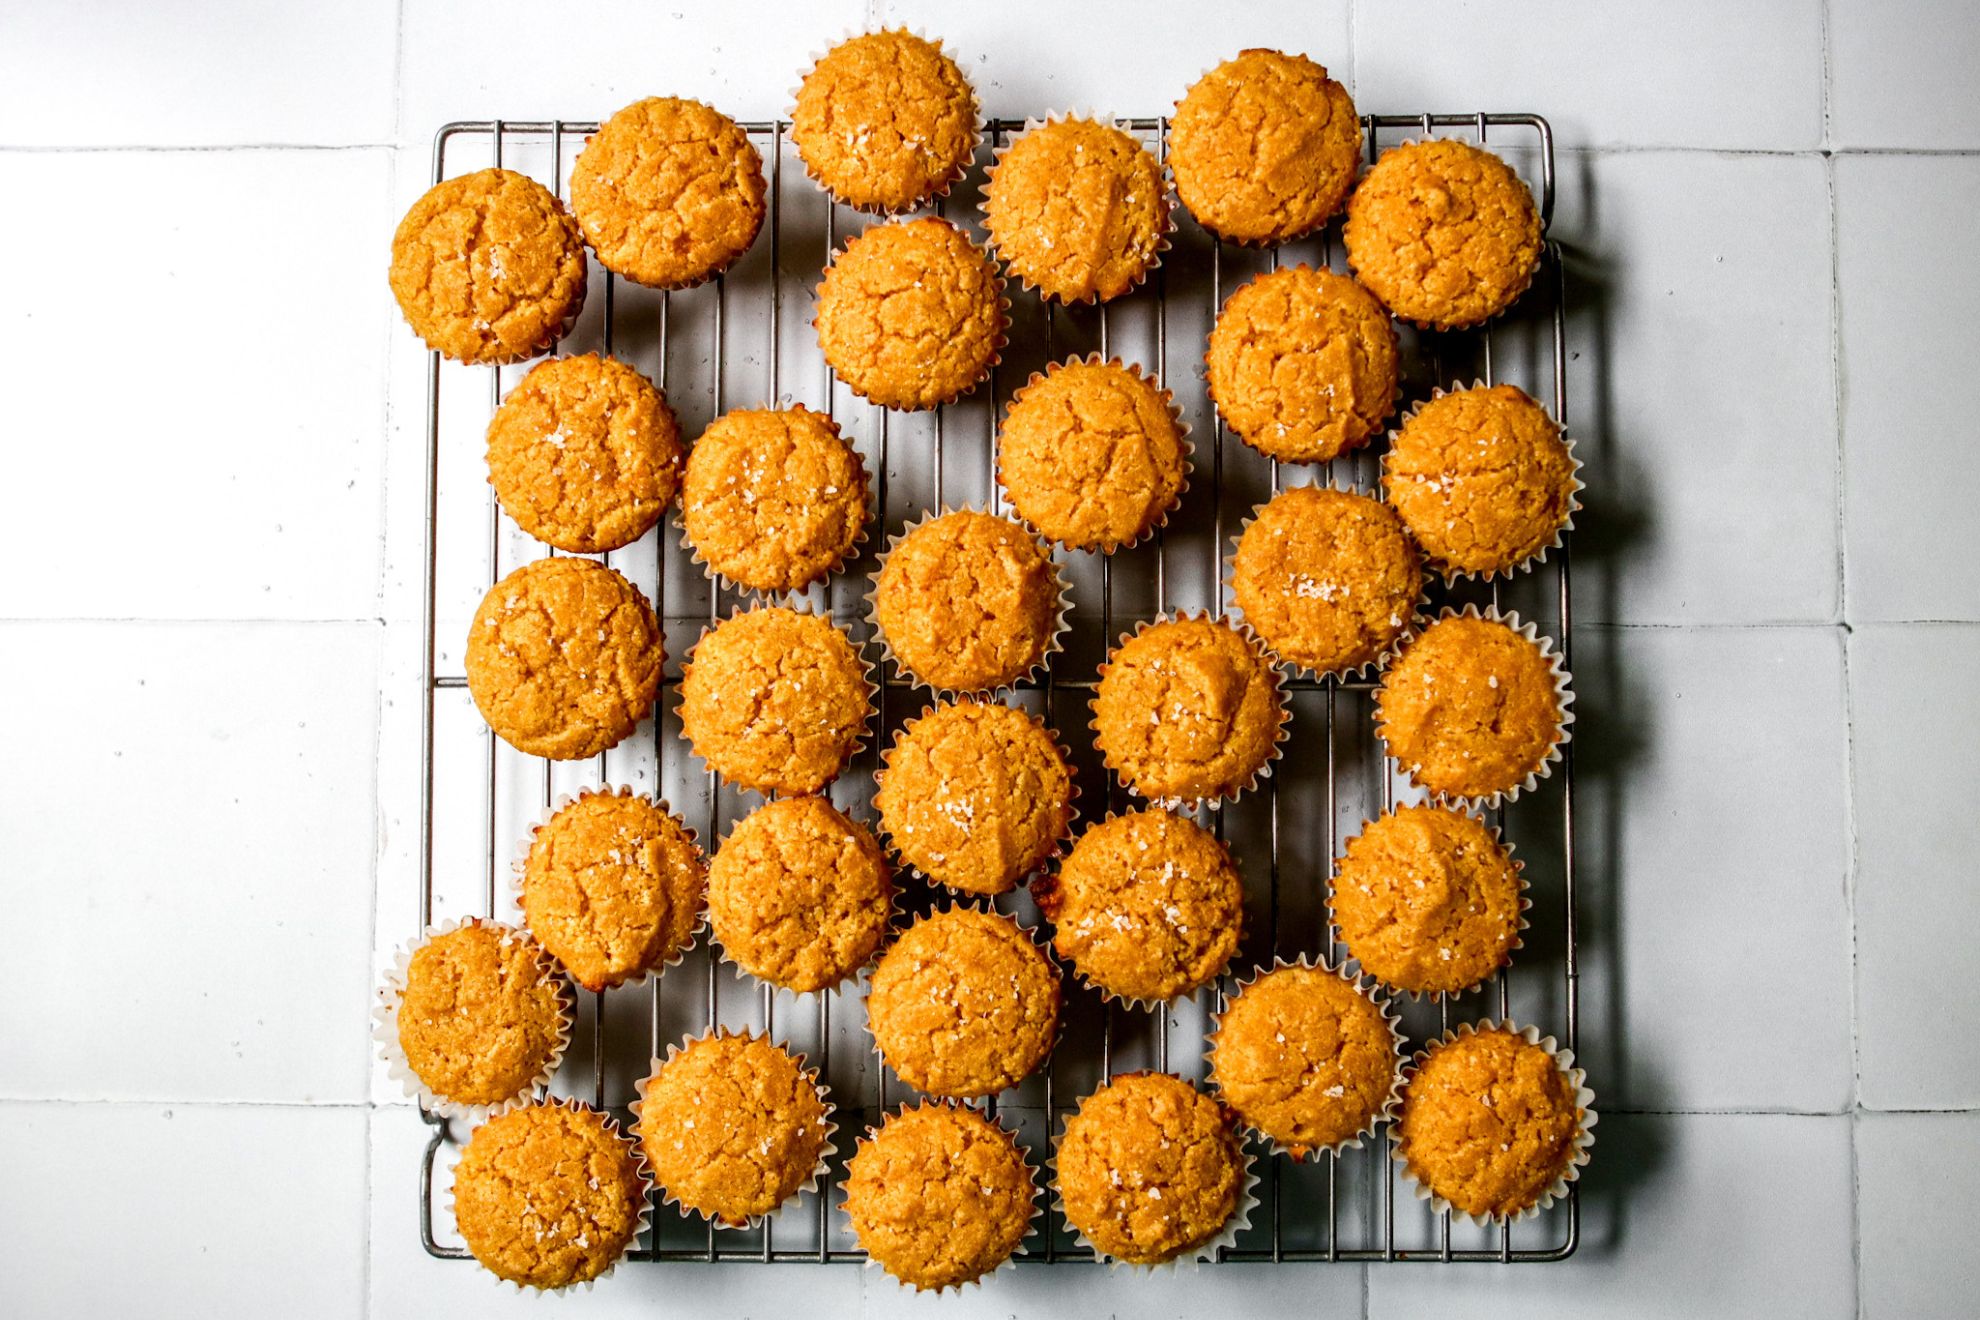 This is an overhead horizontal image of a silver cooling rack with baked mini cornbread muffins on it. The mini muffins are topped with flakey salt. The cooling rack sits on a white square tiled surface.